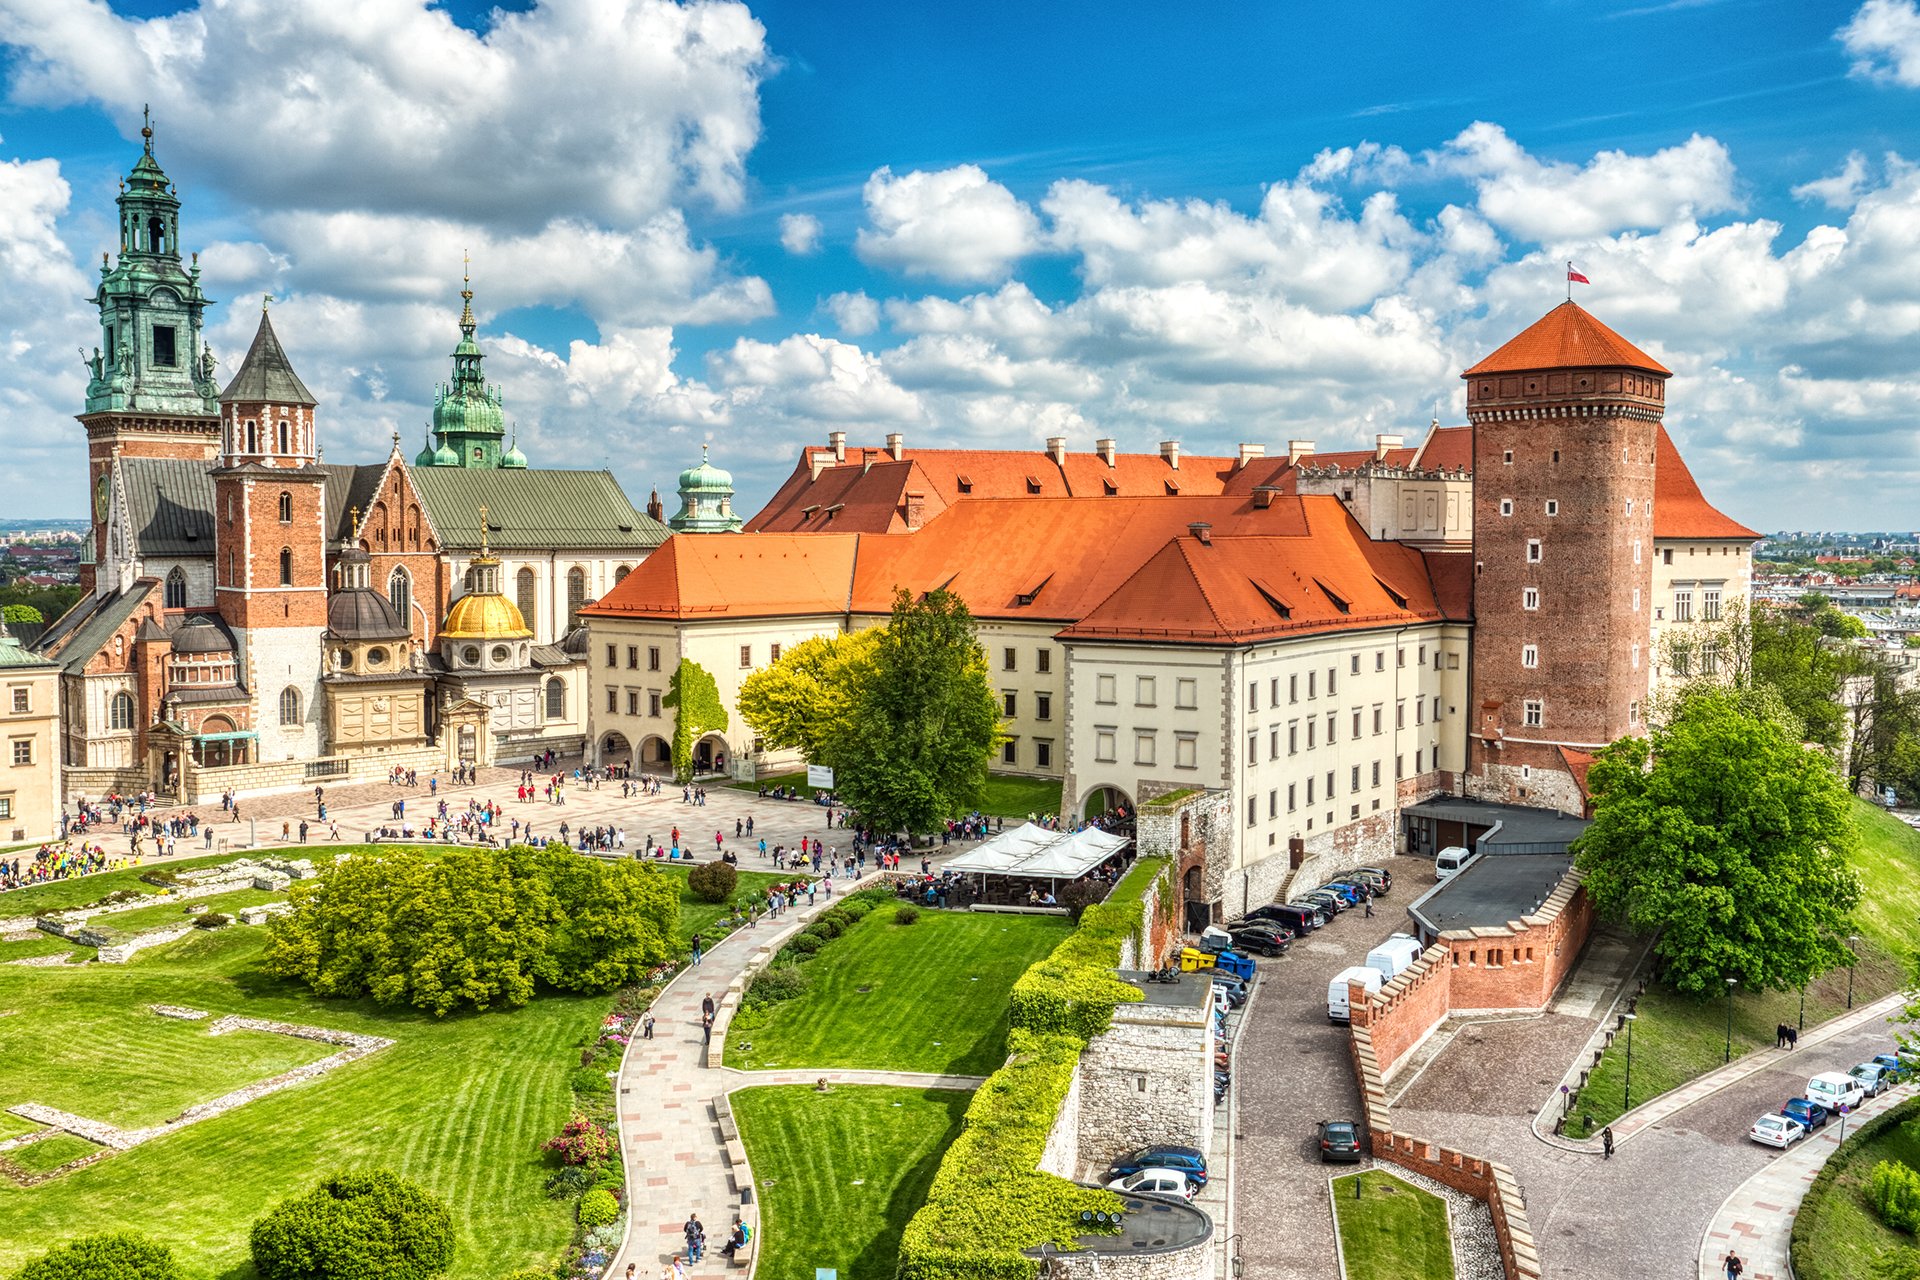 Wawel hill with Royal Castle and Cathedral of Saints Stanislaus and Wenceslaus.